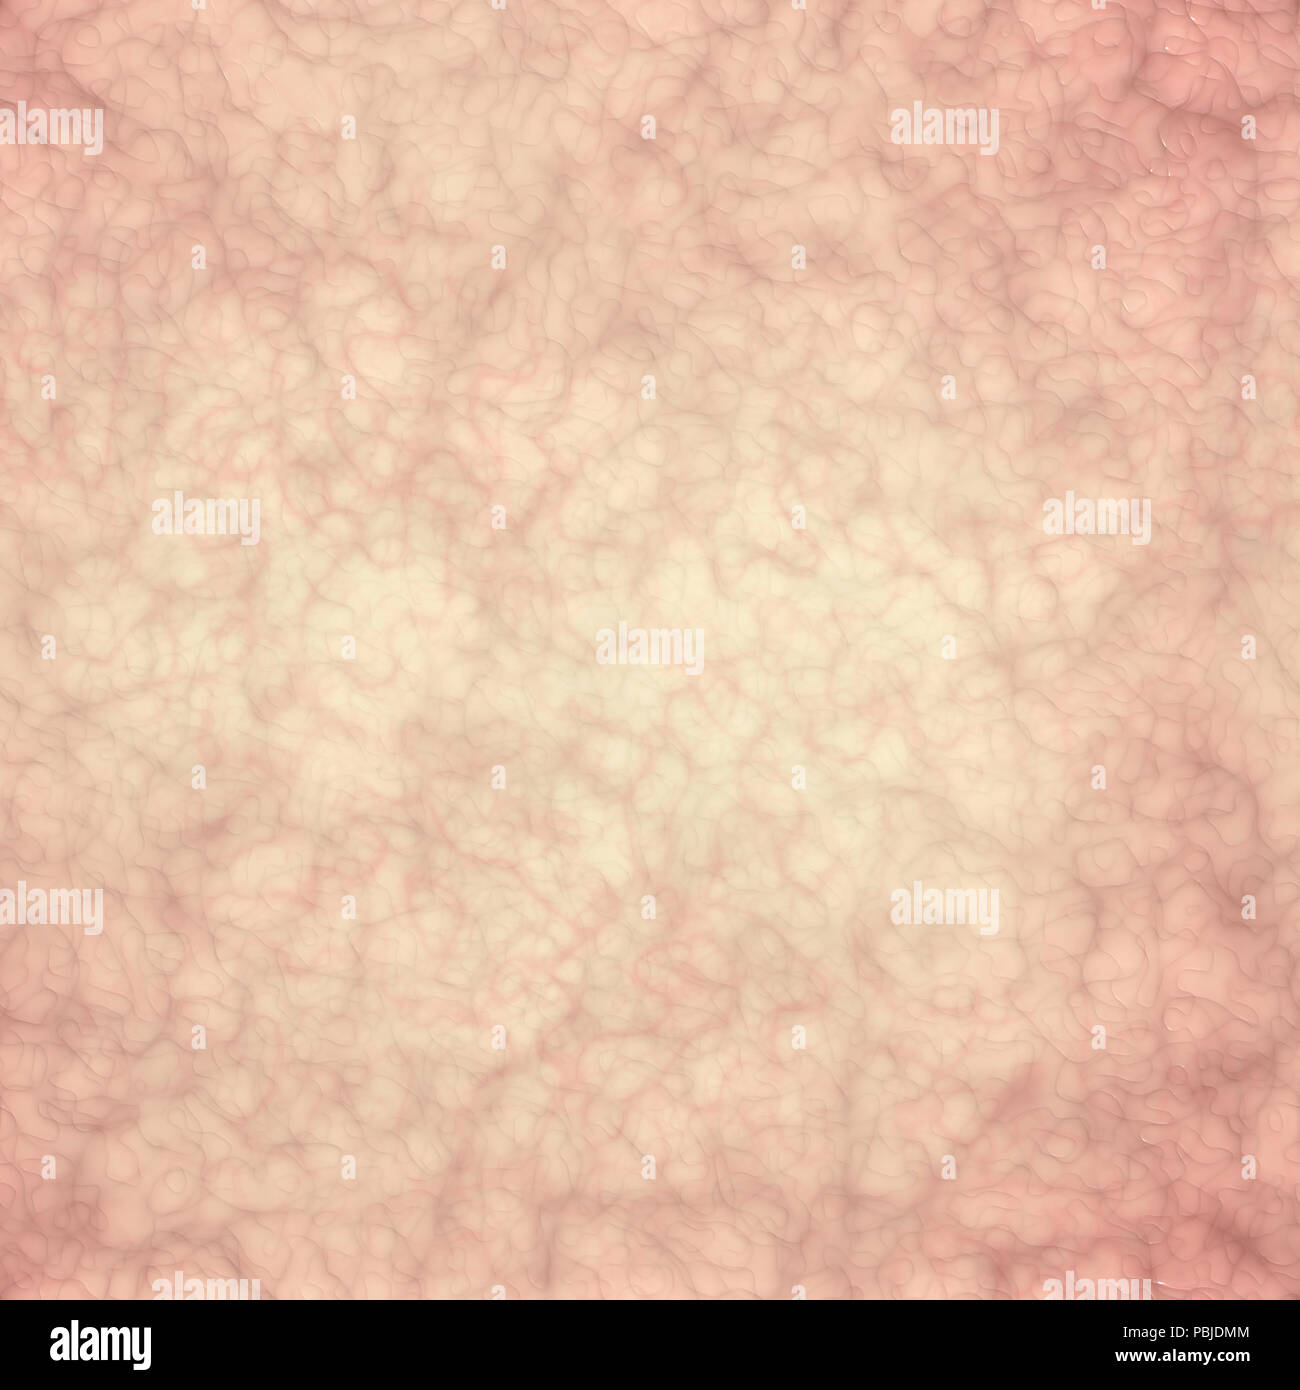 Section of the skin, texture of the skin of a human body, anatomy. 3d rendering Stock Photo